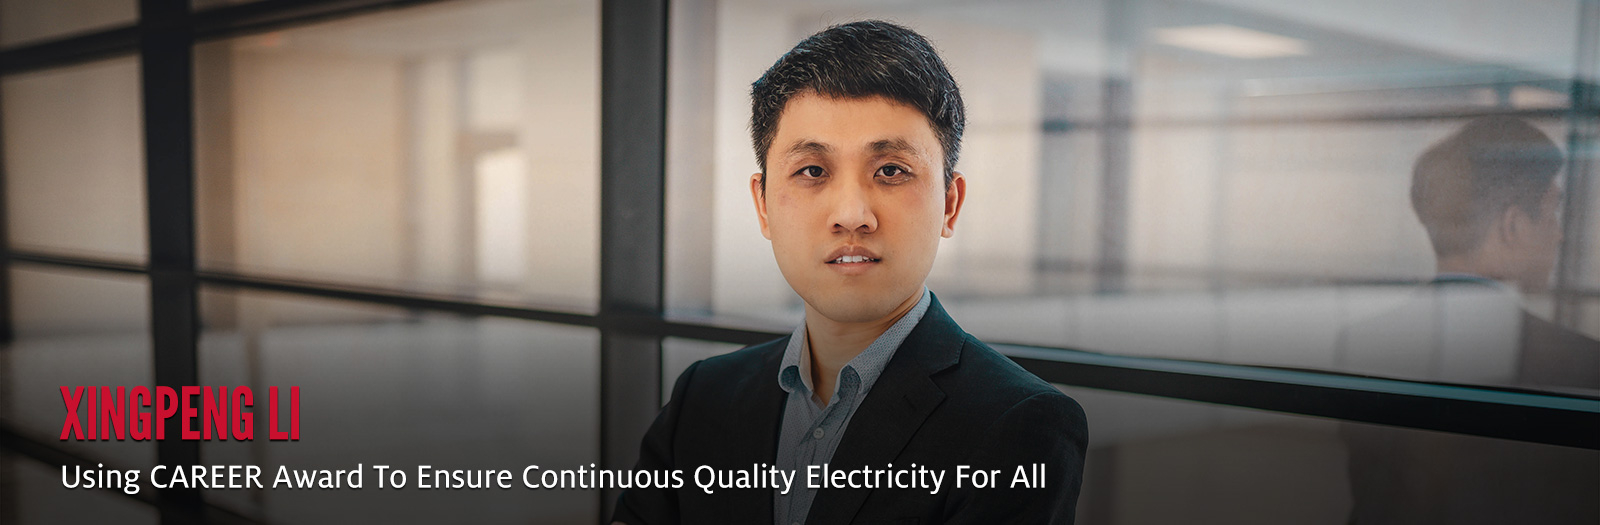 Xingpeng Li Using CAREER Award To Ensure Continuous Quality Electricity For All